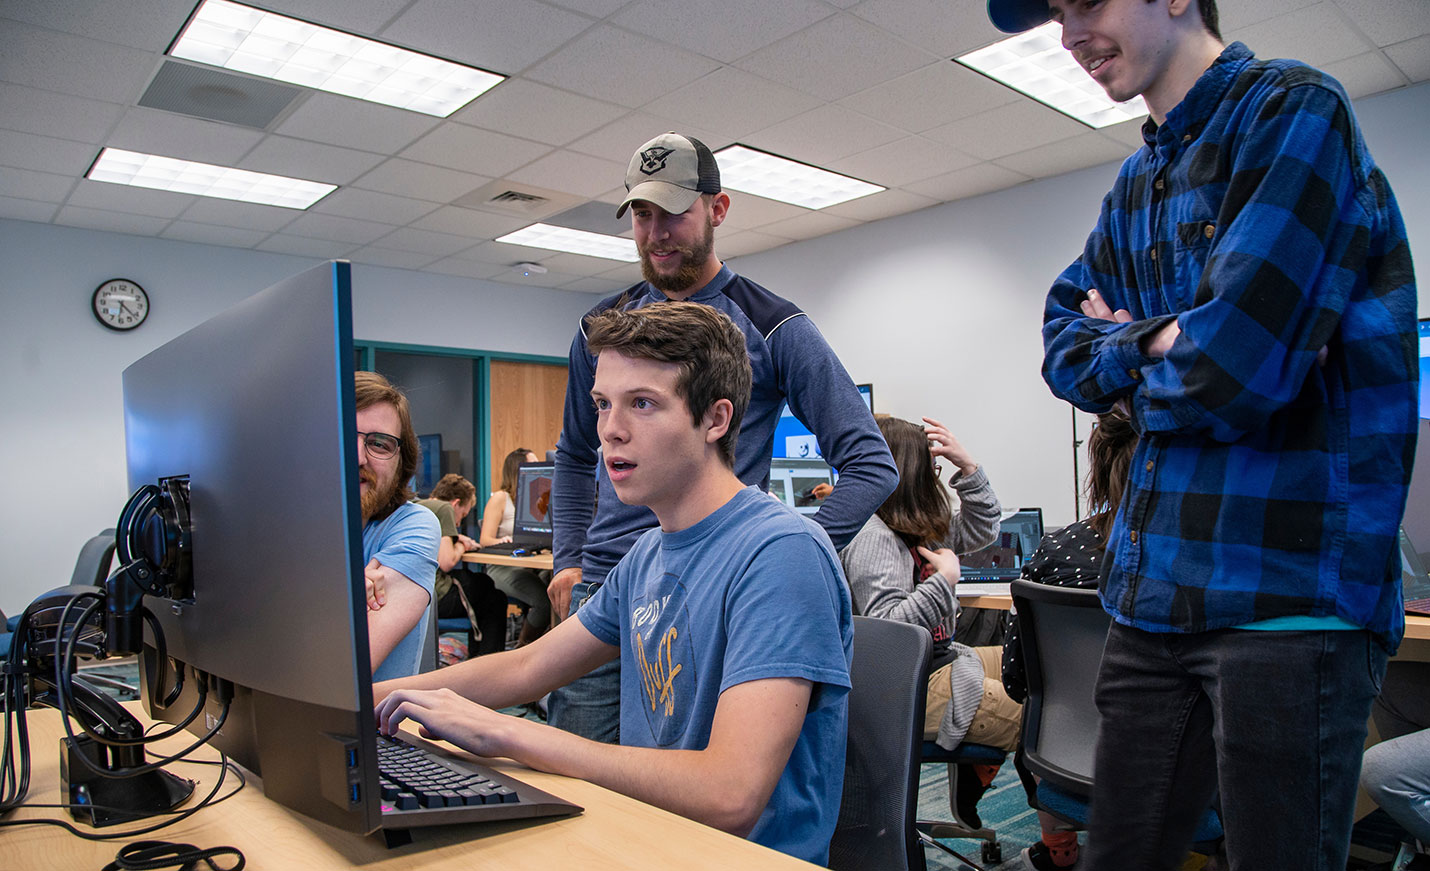 A student sits at a computer while two students standing behind him look on